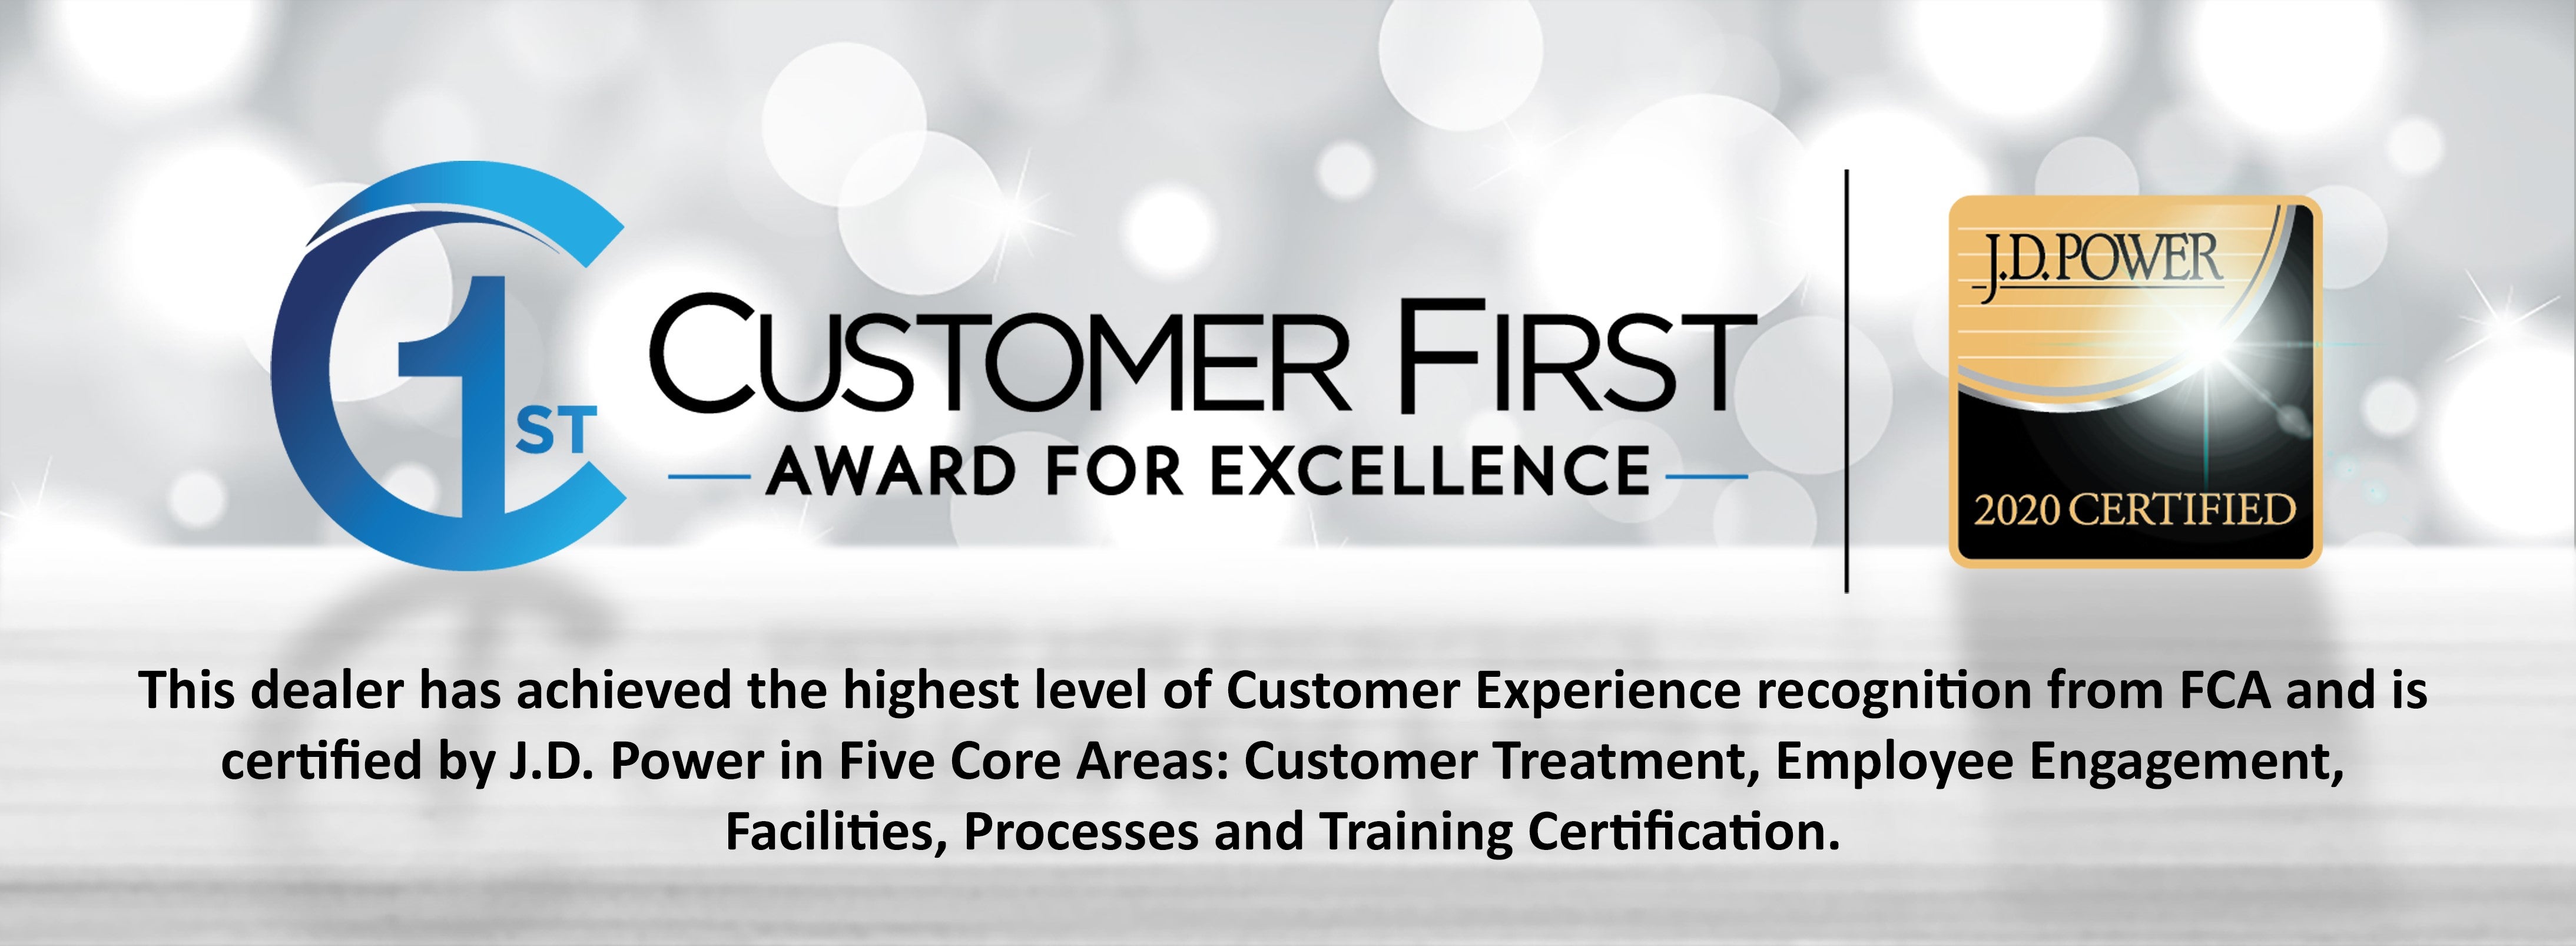 Customer First Award for Excellence for 2019 at Sumter Chrysler Dodge Jeep Ram in Sumter, SC